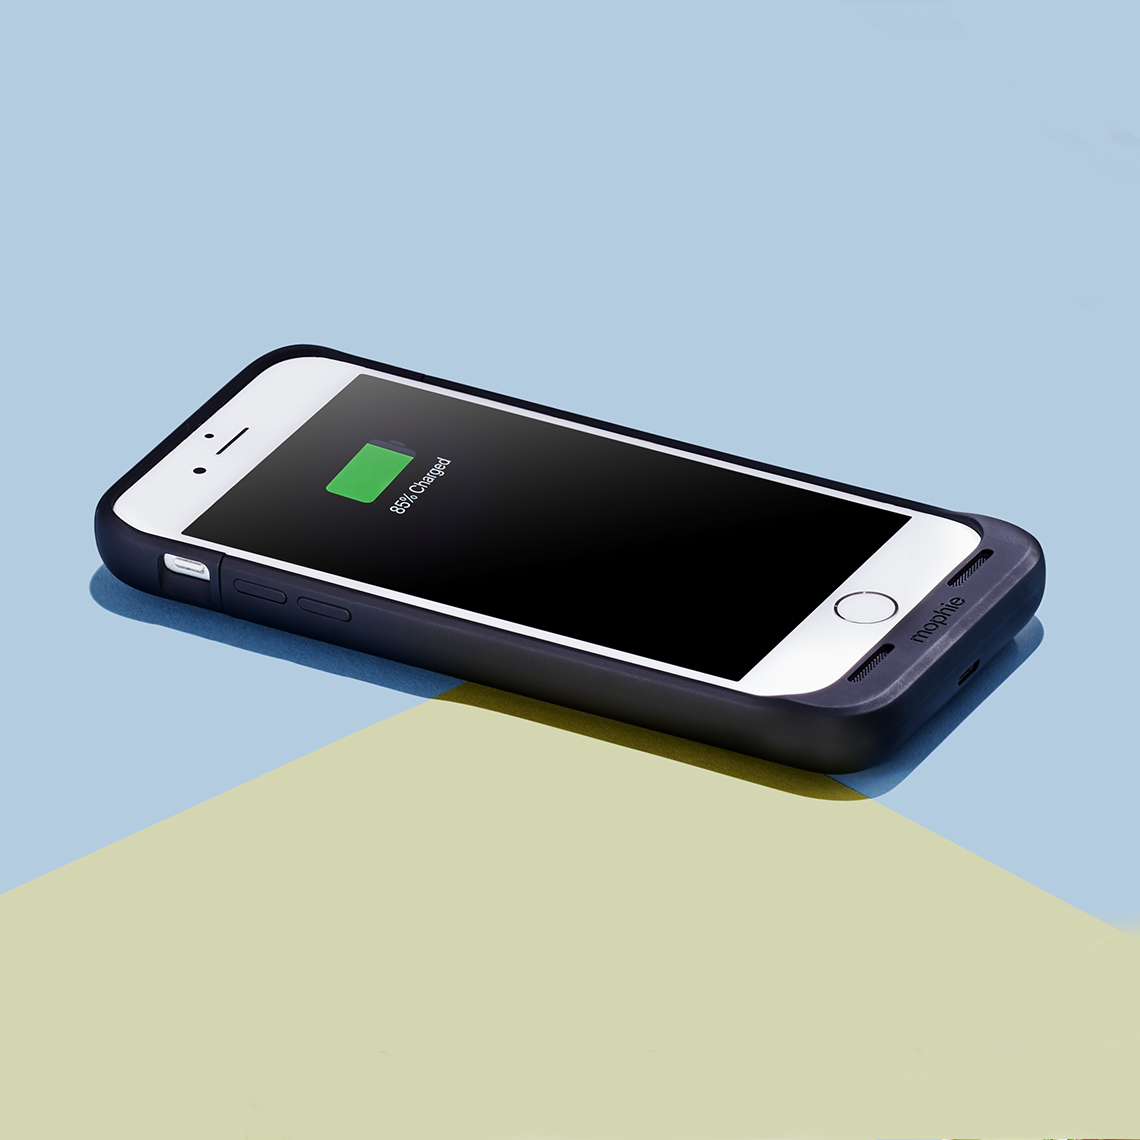 A charging device that snaps on to the back of a cell phone